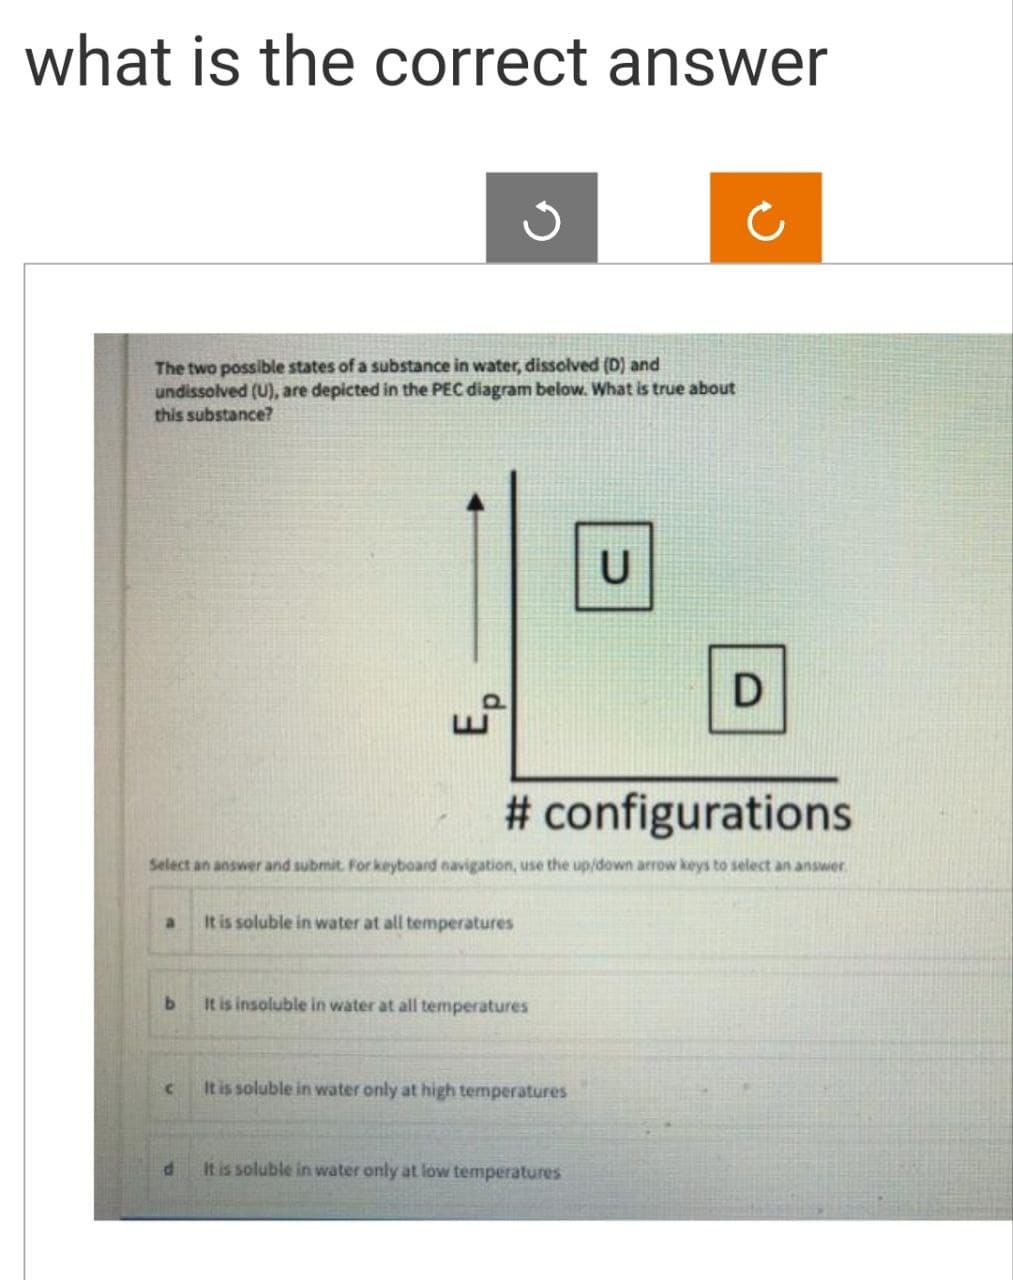 what is the correct answer
ง
The two possible states of a substance in water, dissolved (D) and
undissolved (U), are depicted in the PEC diagram below. What is true about
this substance?
Ep
U
D
# configurations
Select an answer and submit. For keyboard navigation, use the up/down arrow keys to select an answer.
a
It is soluble in water at all temperatures
b
It is insoluble in water at all temperatures
C
It is soluble in water only at high temperatures
d
It is soluble in water only at low temperatures